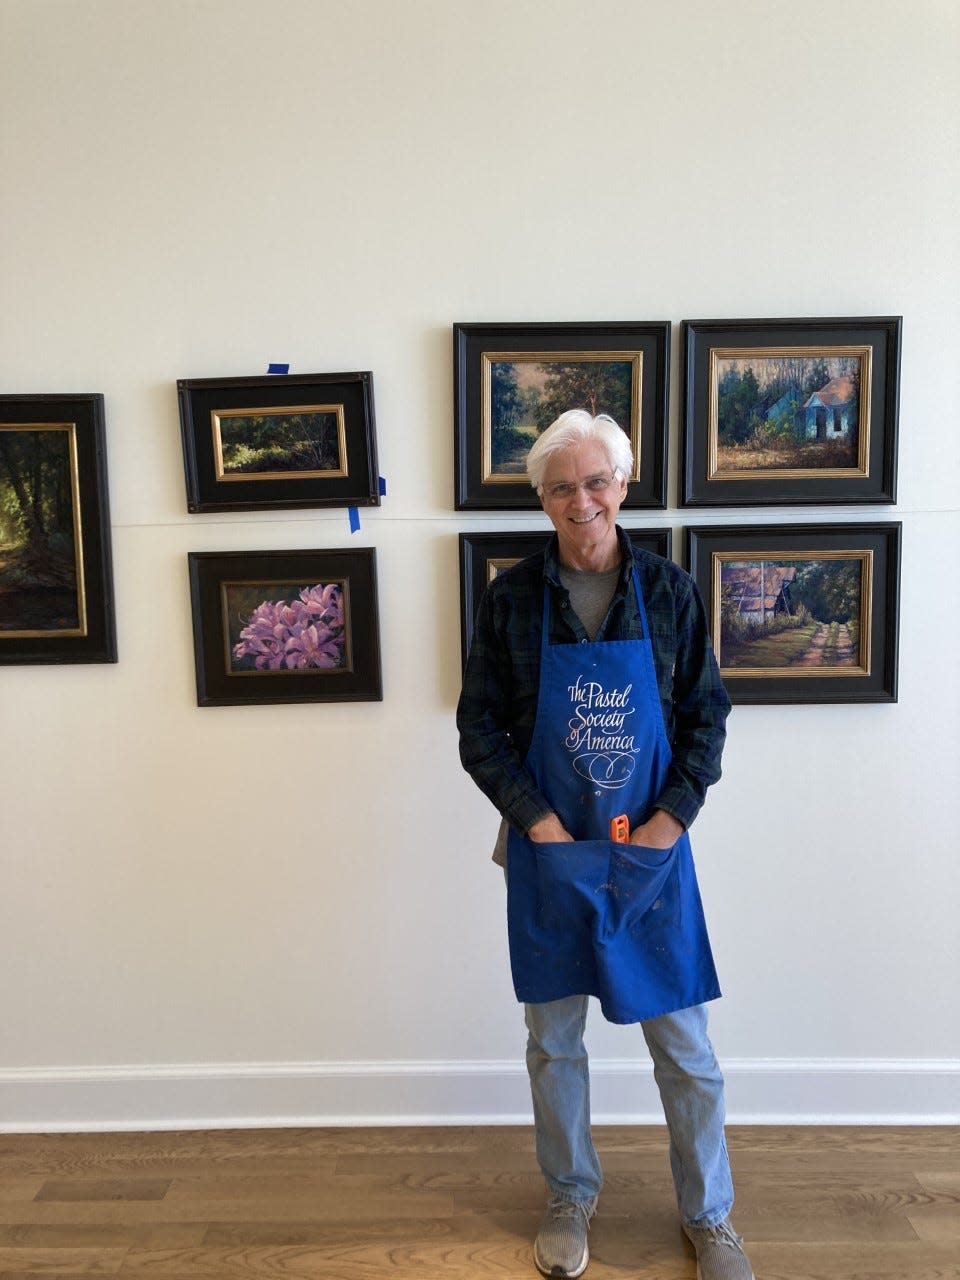 Artist Charles Peer stands in front of his exhibit at Arts on Main.